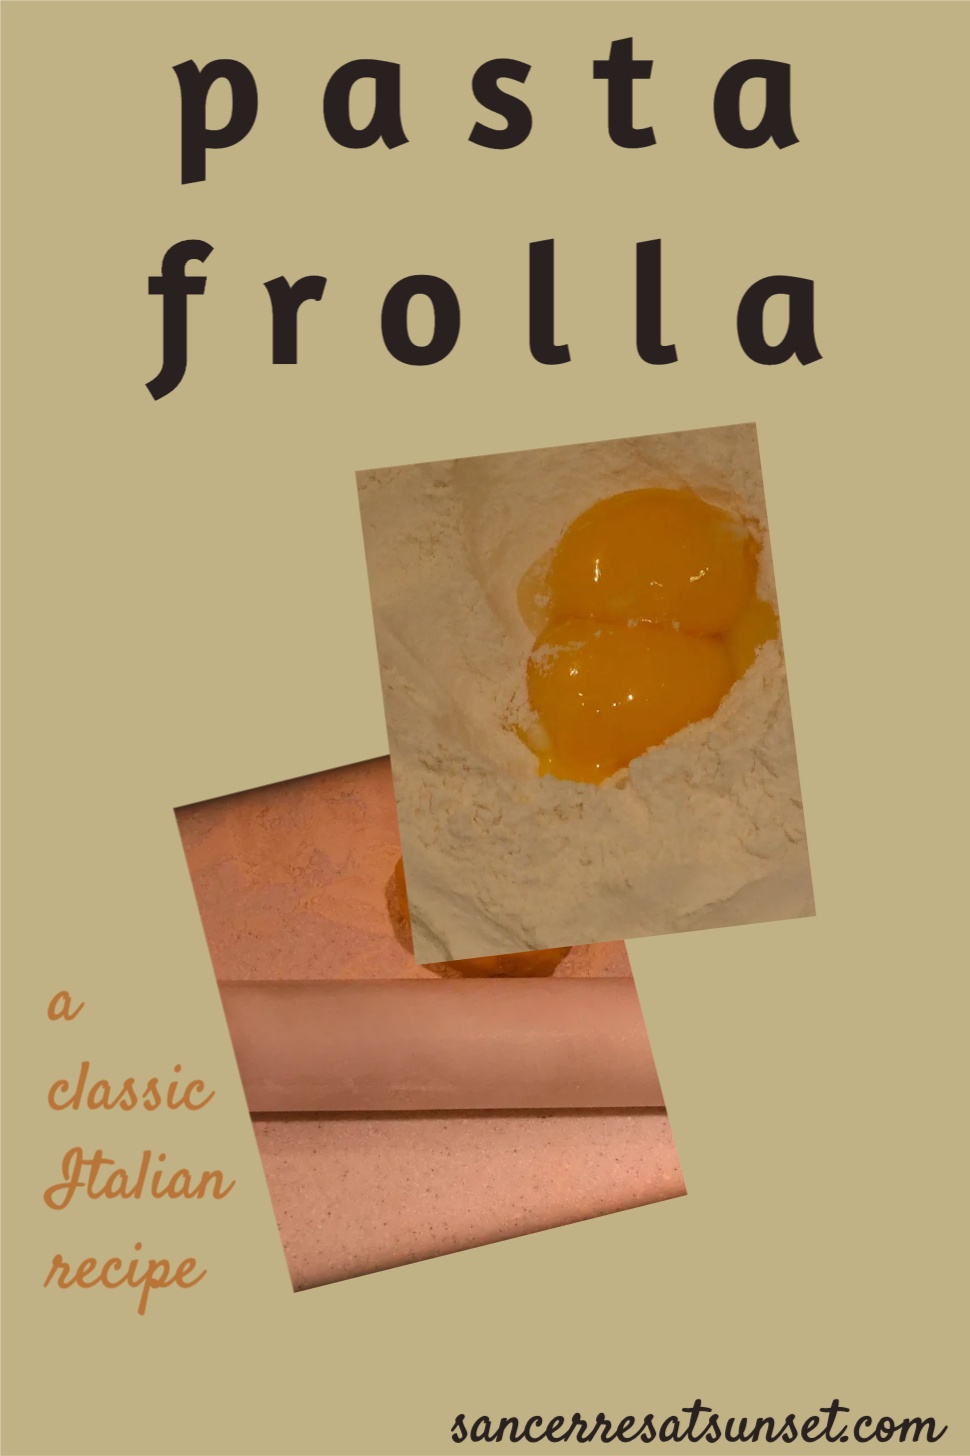 How to Make Pasta Frolla, Italian Pastry Dough